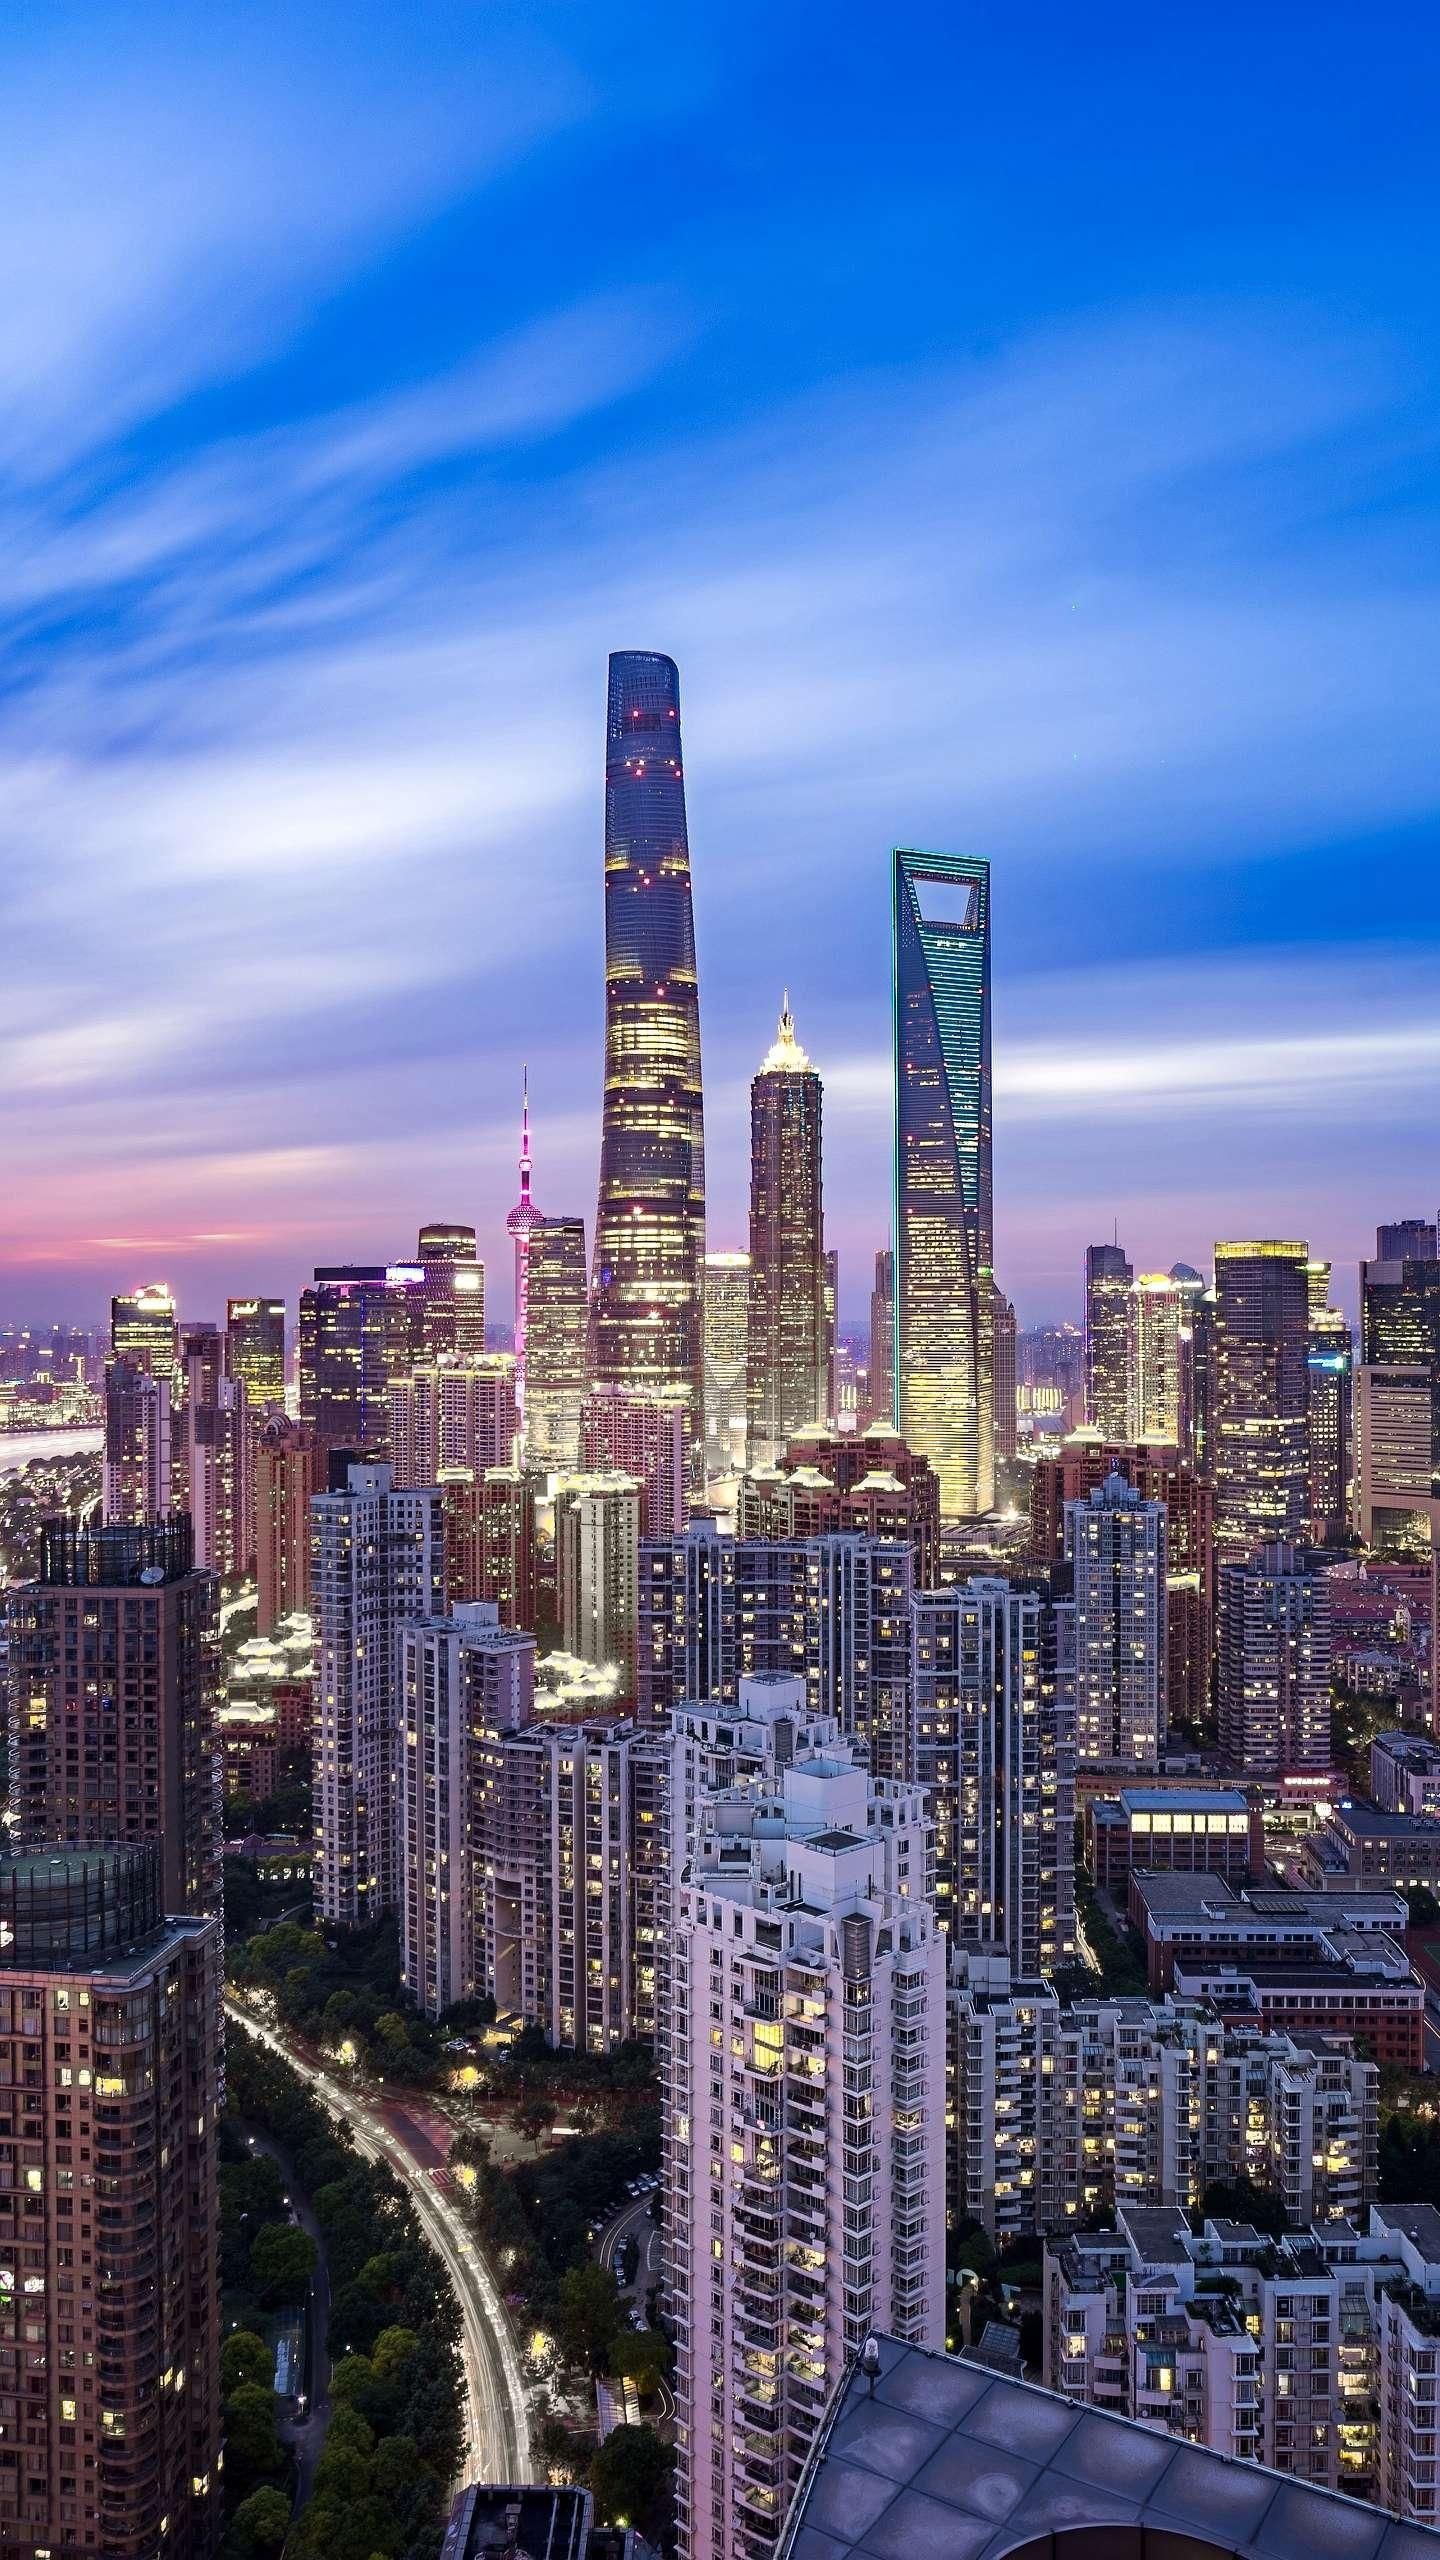 Jin Mao and SWFC, Pudong district, Trio of structures, City's iconic landmarks, 1440x2560 HD Handy